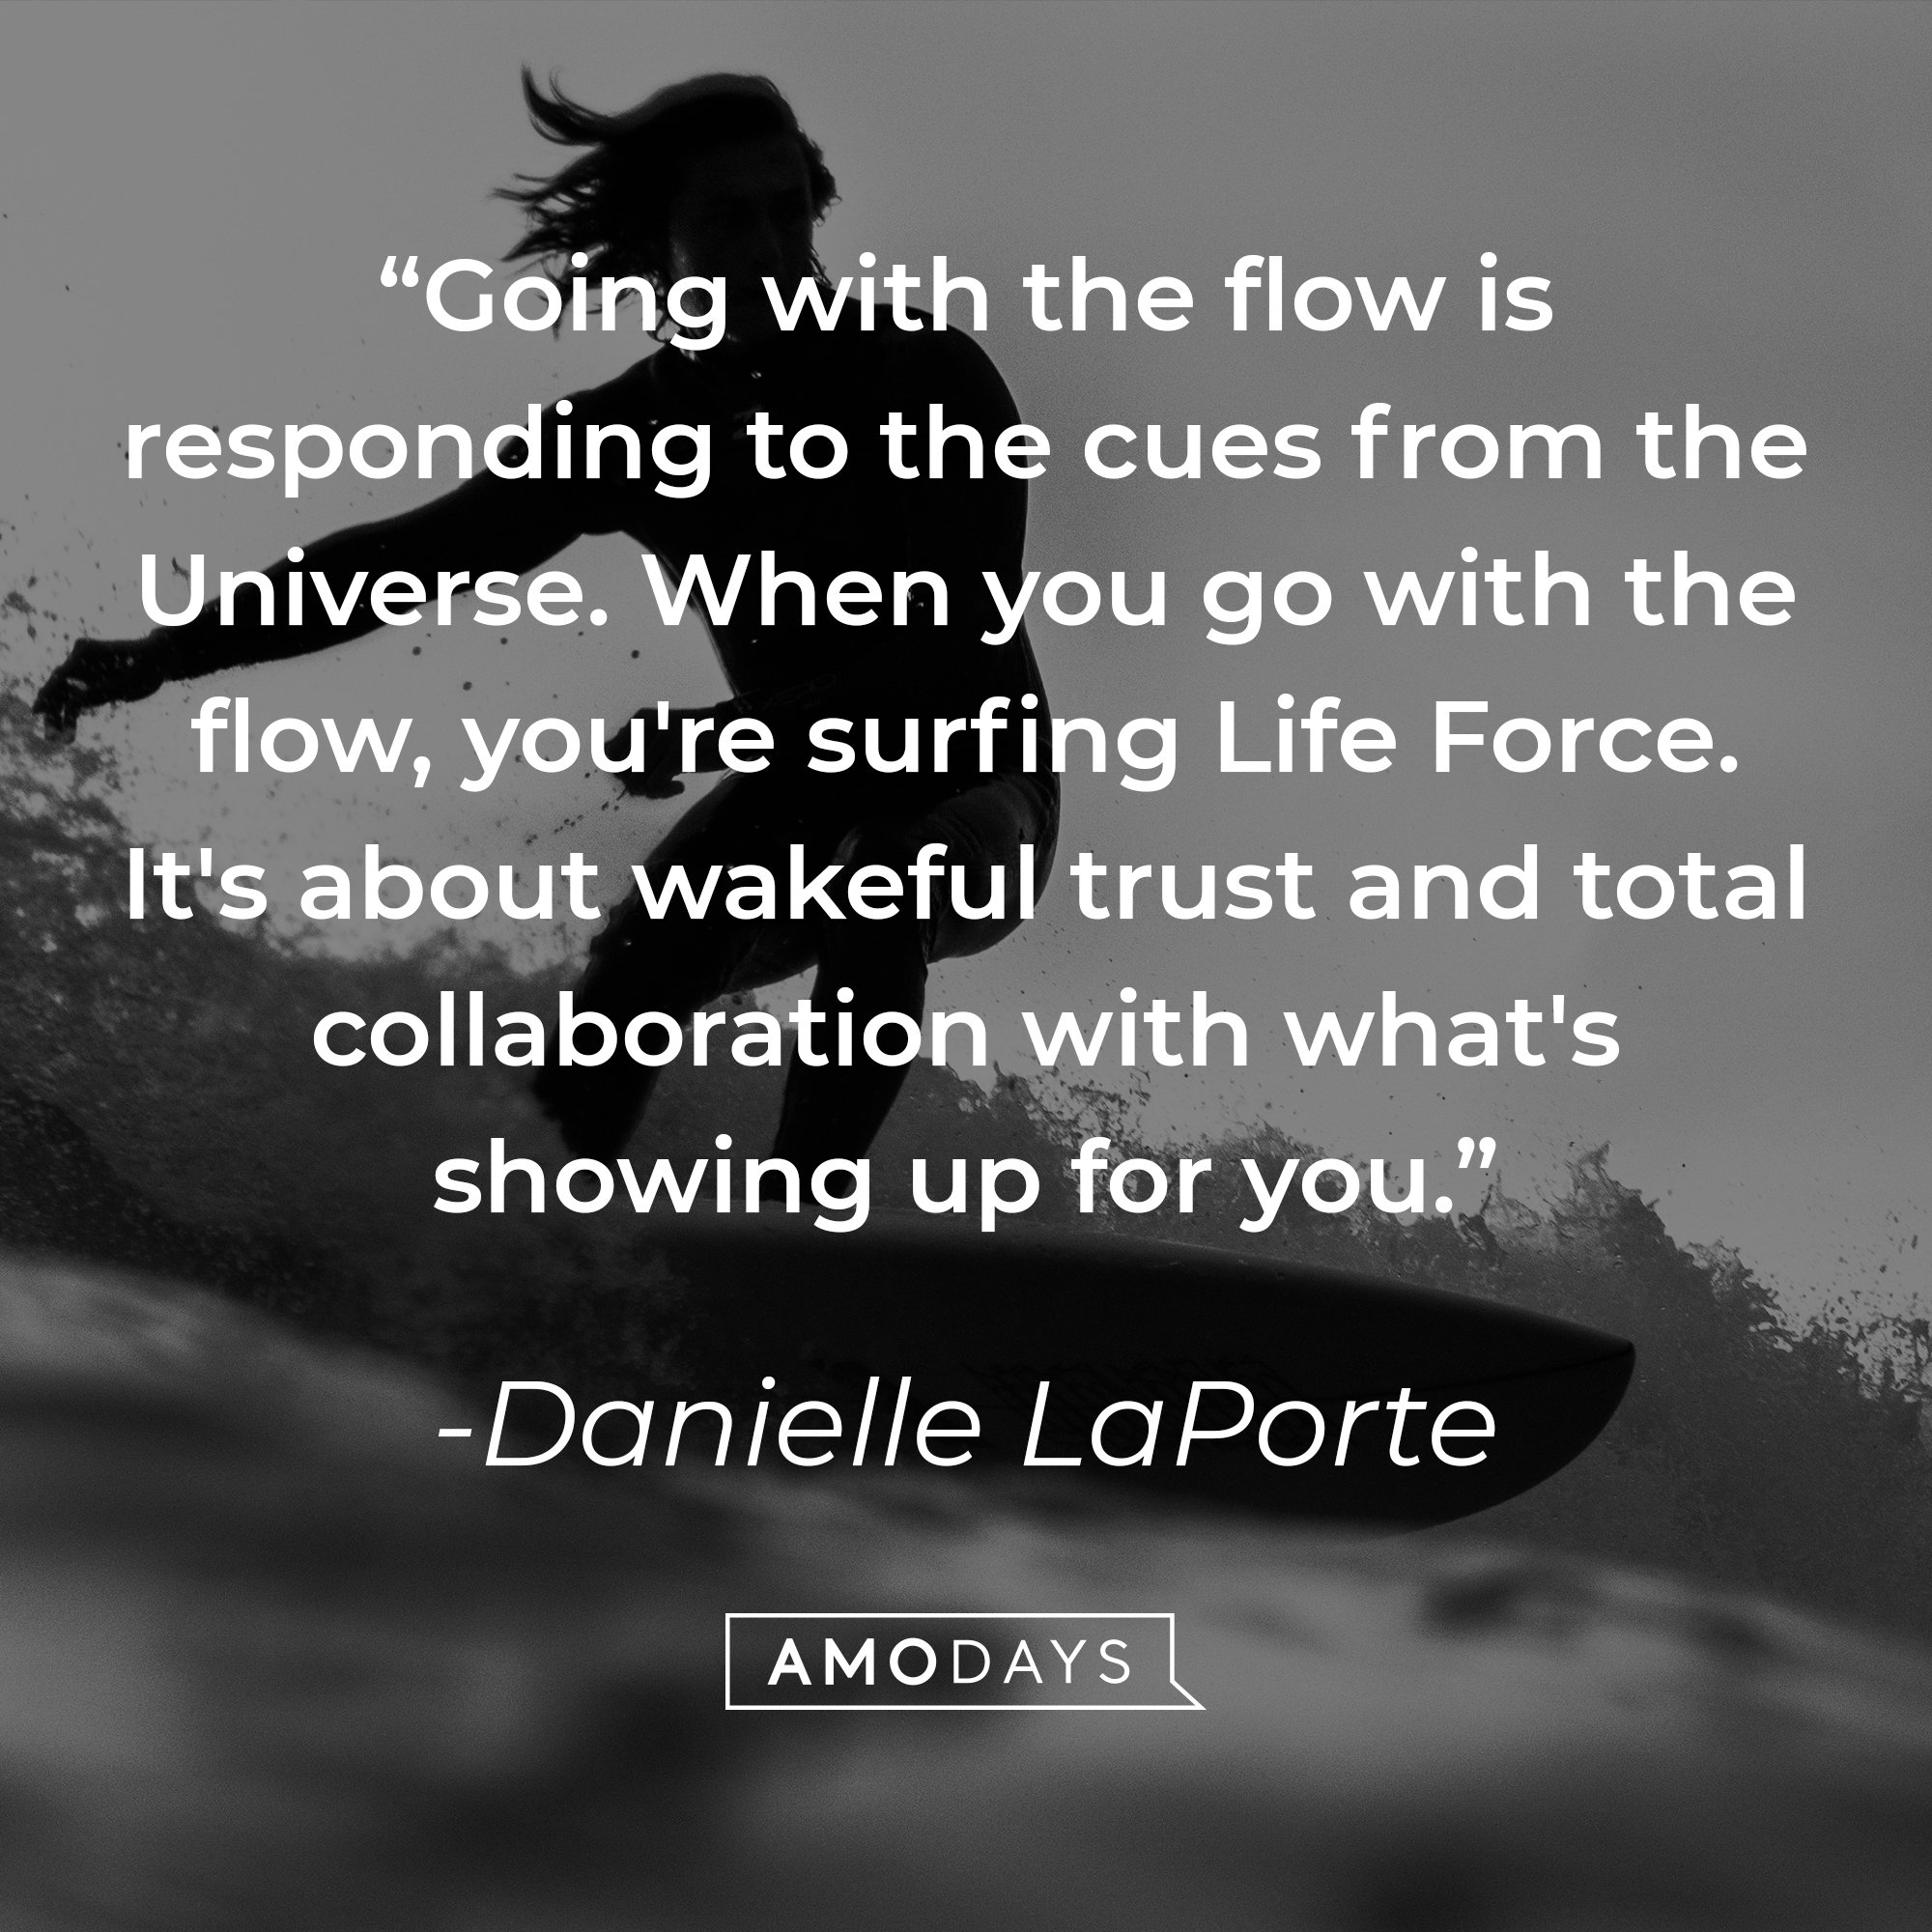 Danielle LaPorte's quote: "Going with the flow is responding to the cues from the Universe. When you go with the flow, you're surfing Life Force. It's about wakeful trust and total collaboration with what's showing up for you." | Image: AmoDays